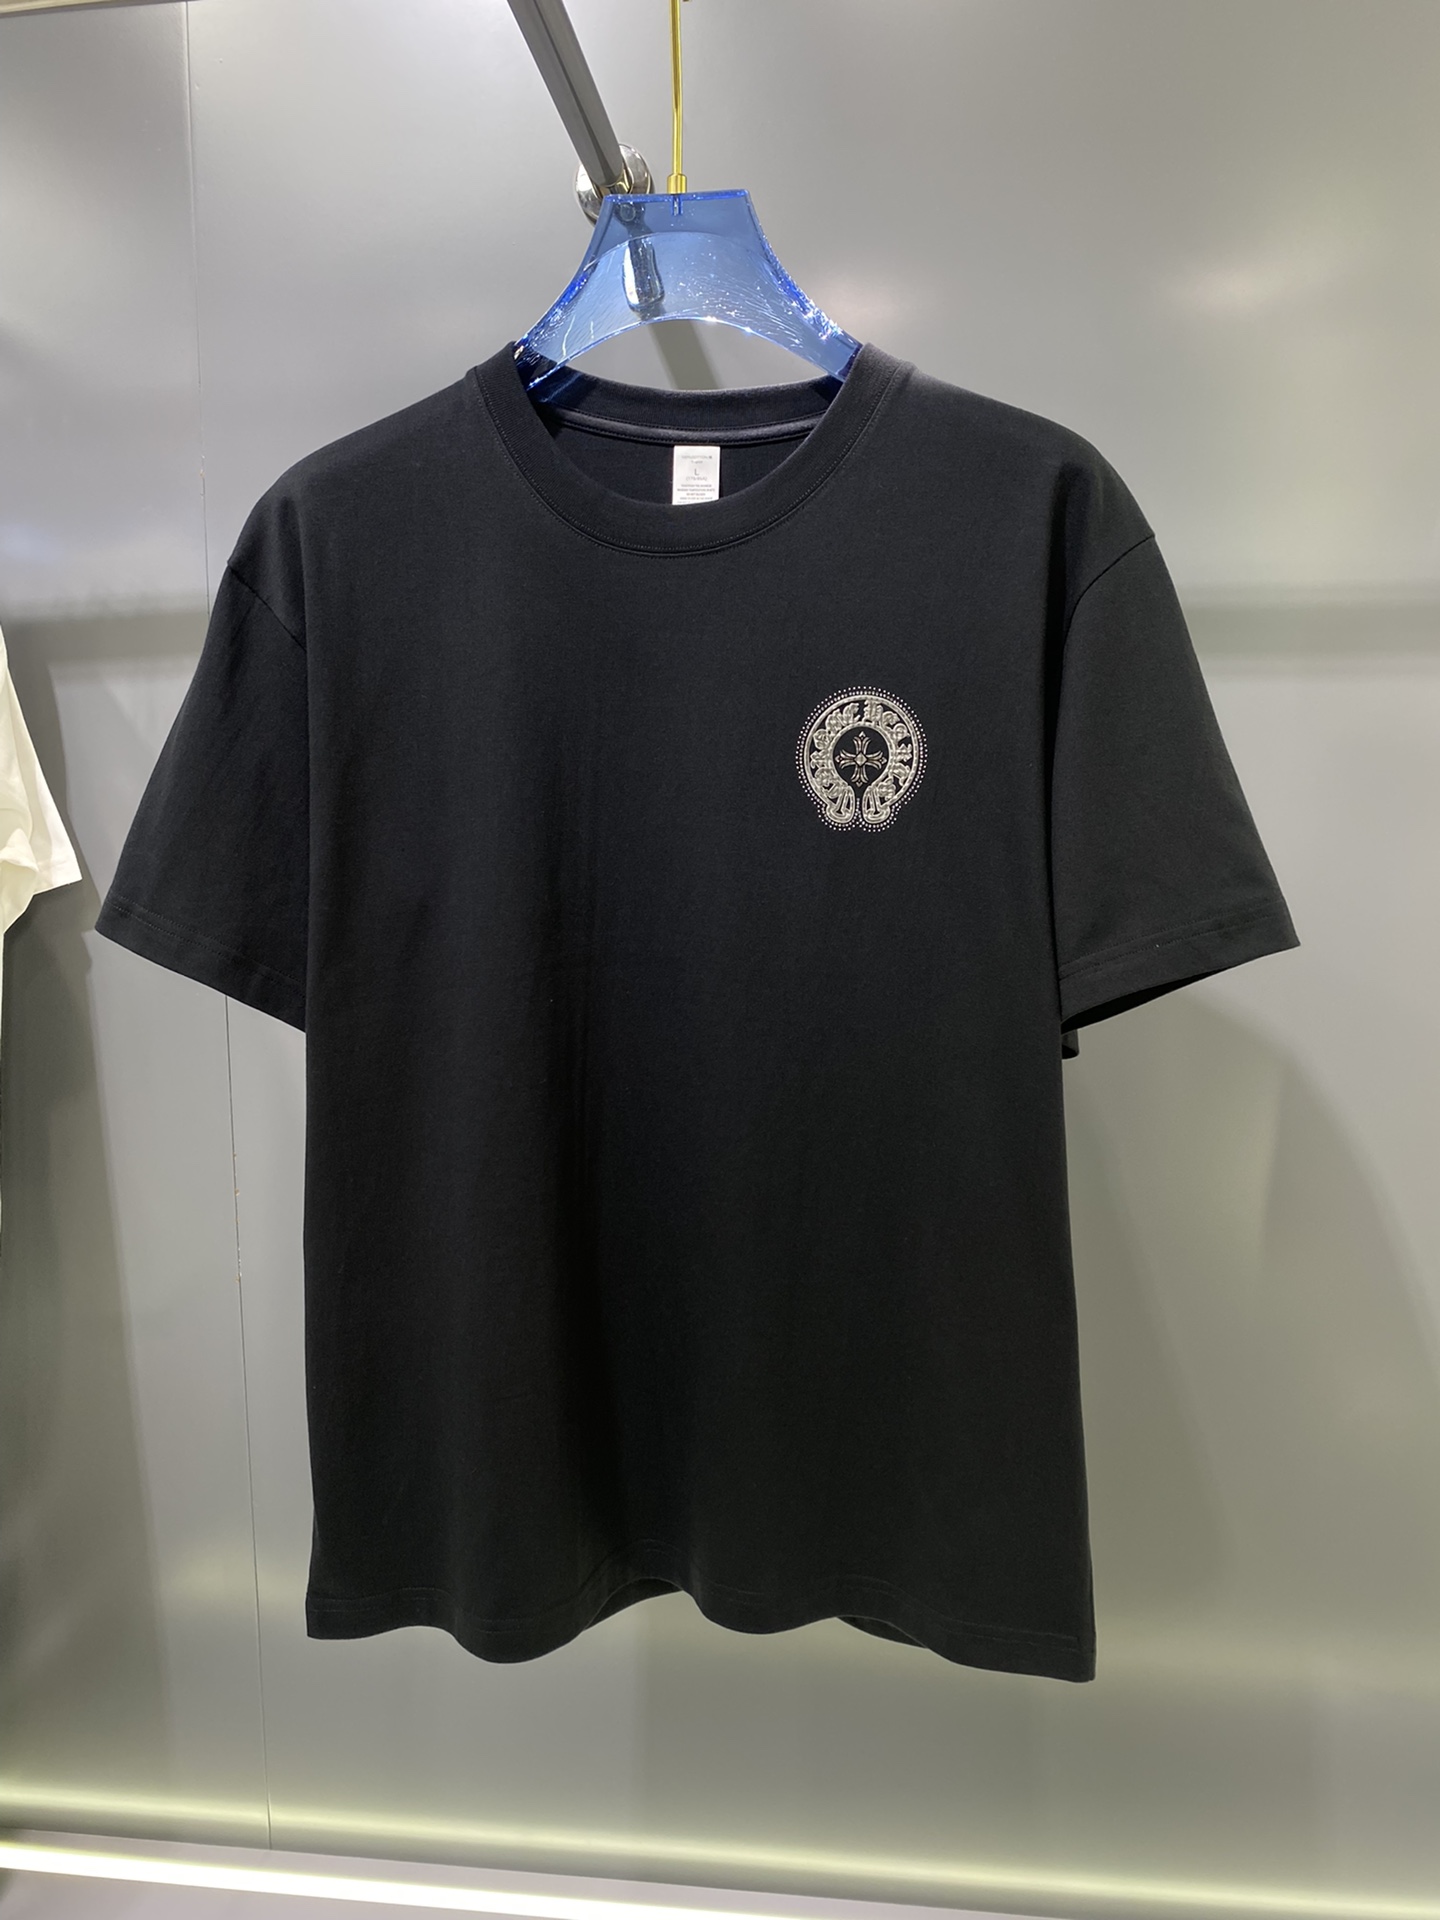 Chrome Hearts Clothing T-Shirt Hot Sale
 Unisex Cotton Spring/Summer Collection Fashion Short Sleeve